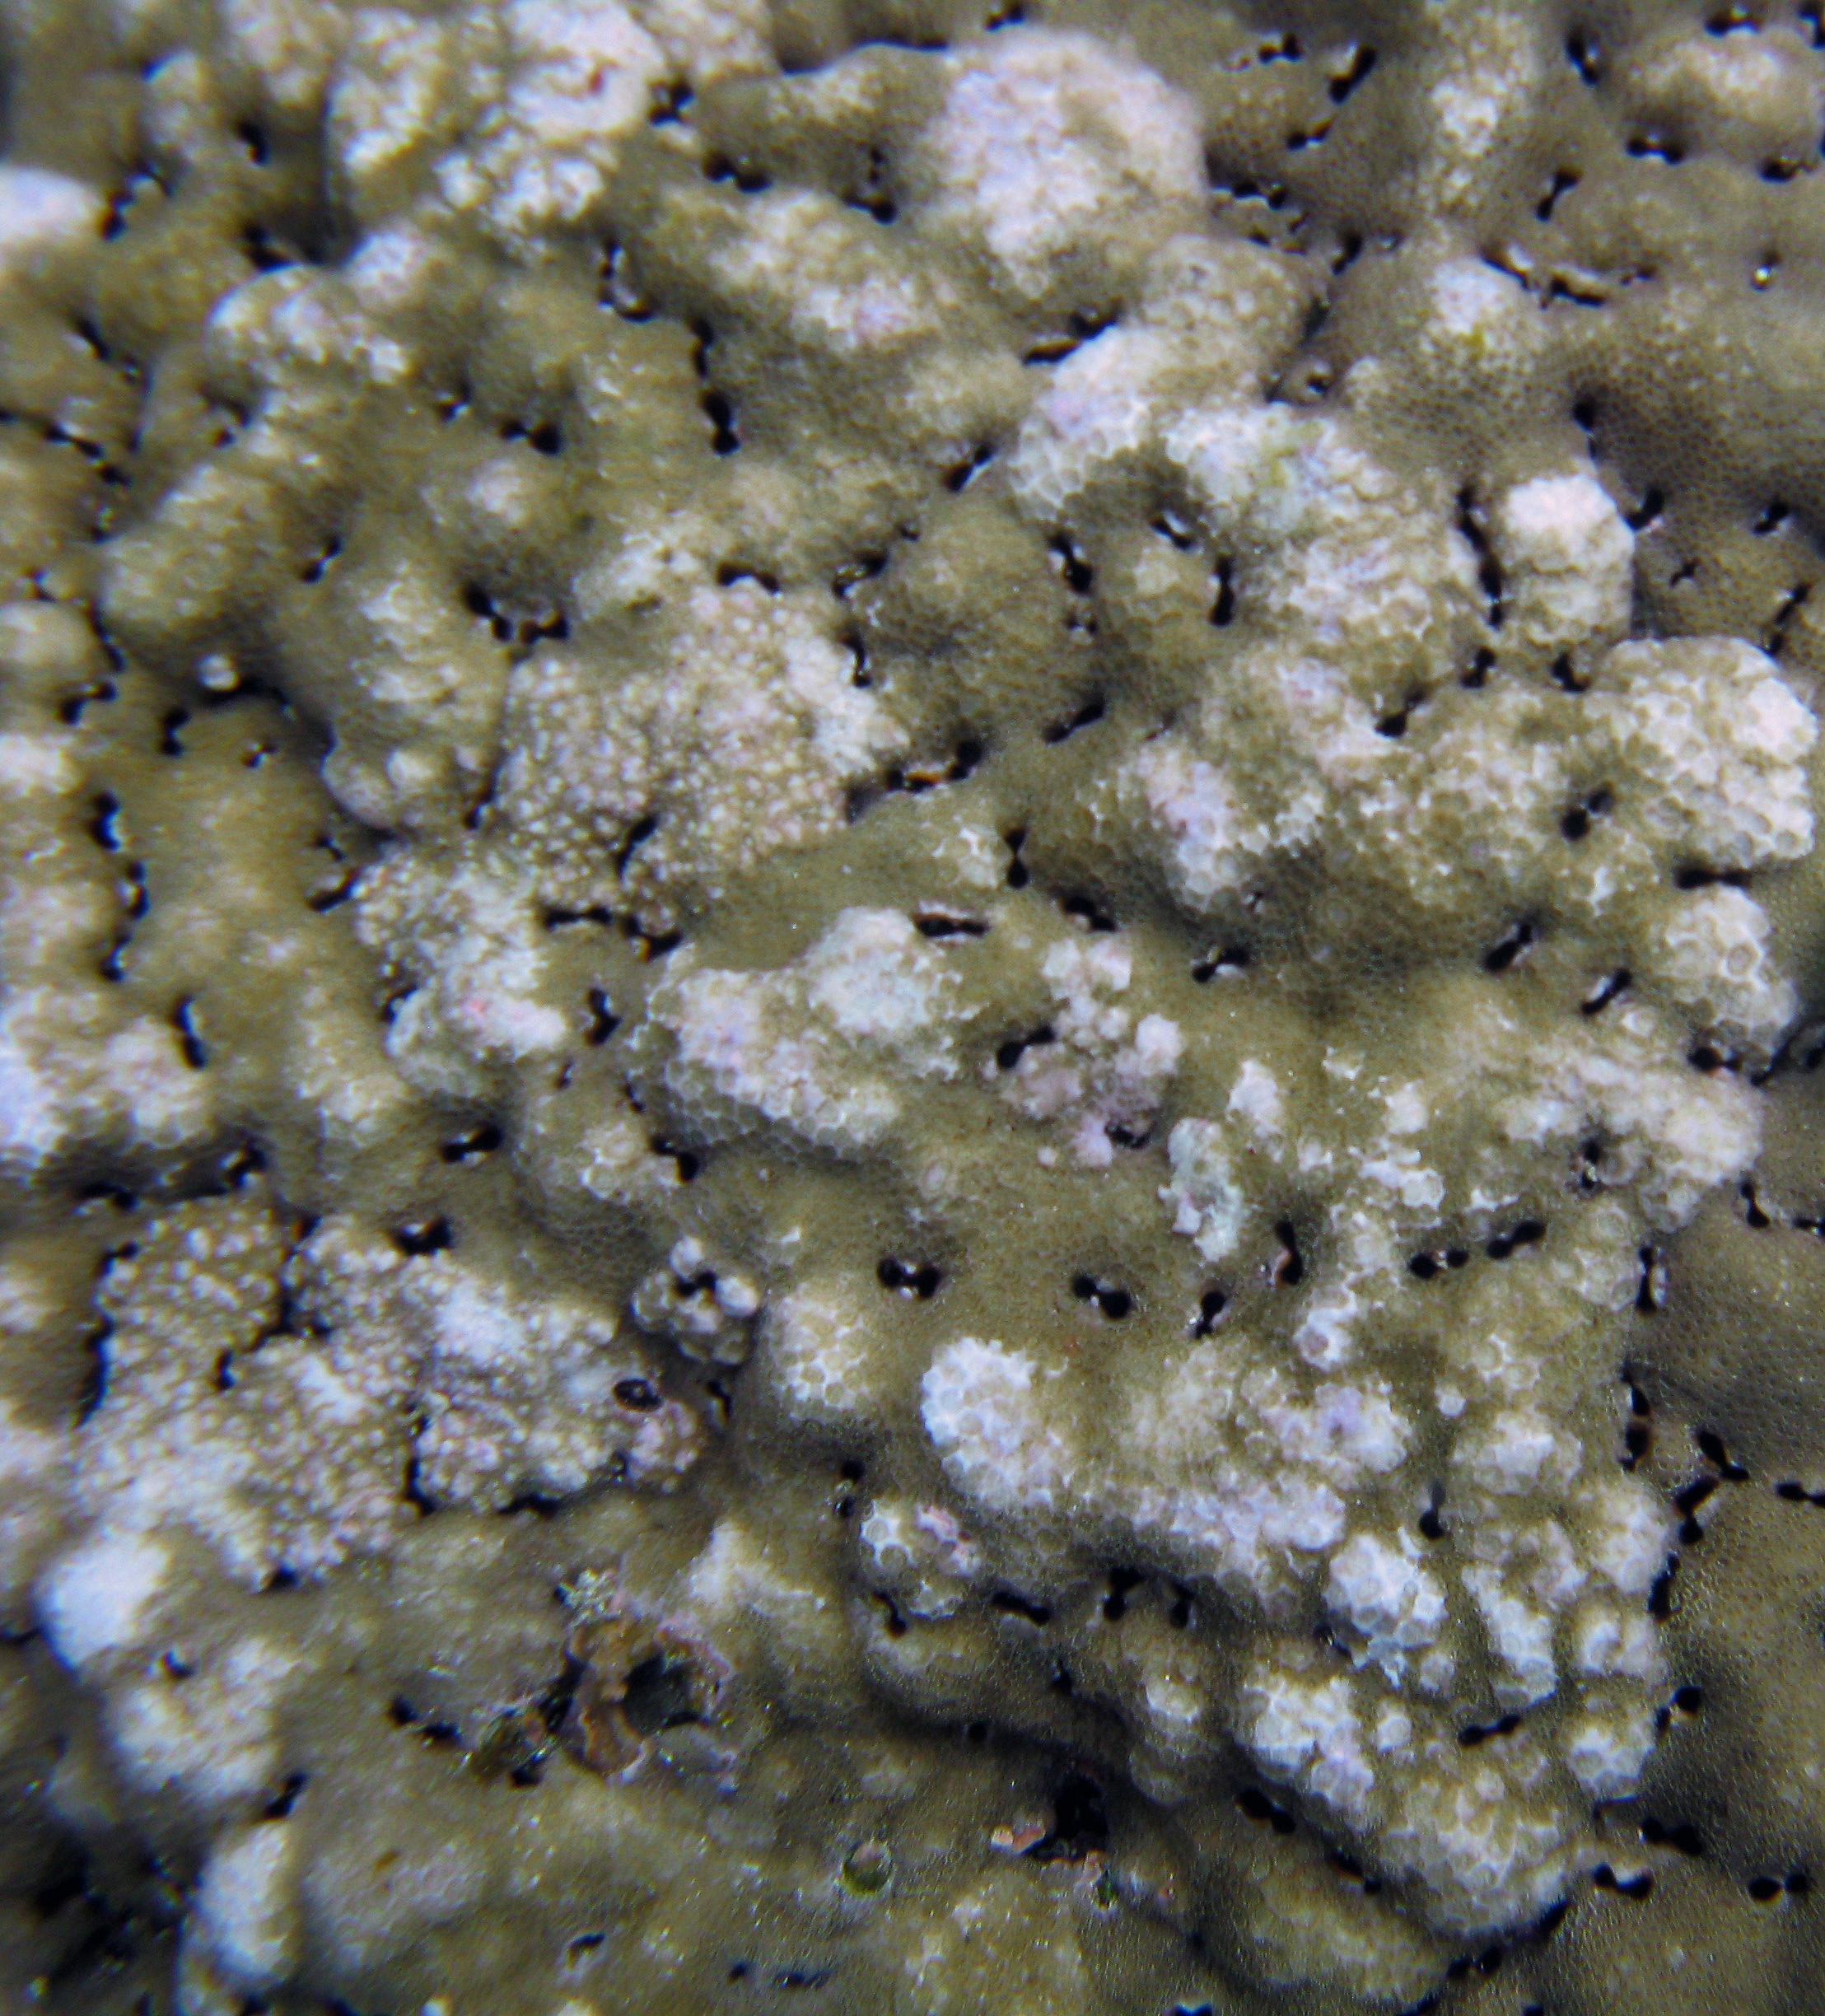 Small mussels inside the coral colony have pockmocked its surface with openings.